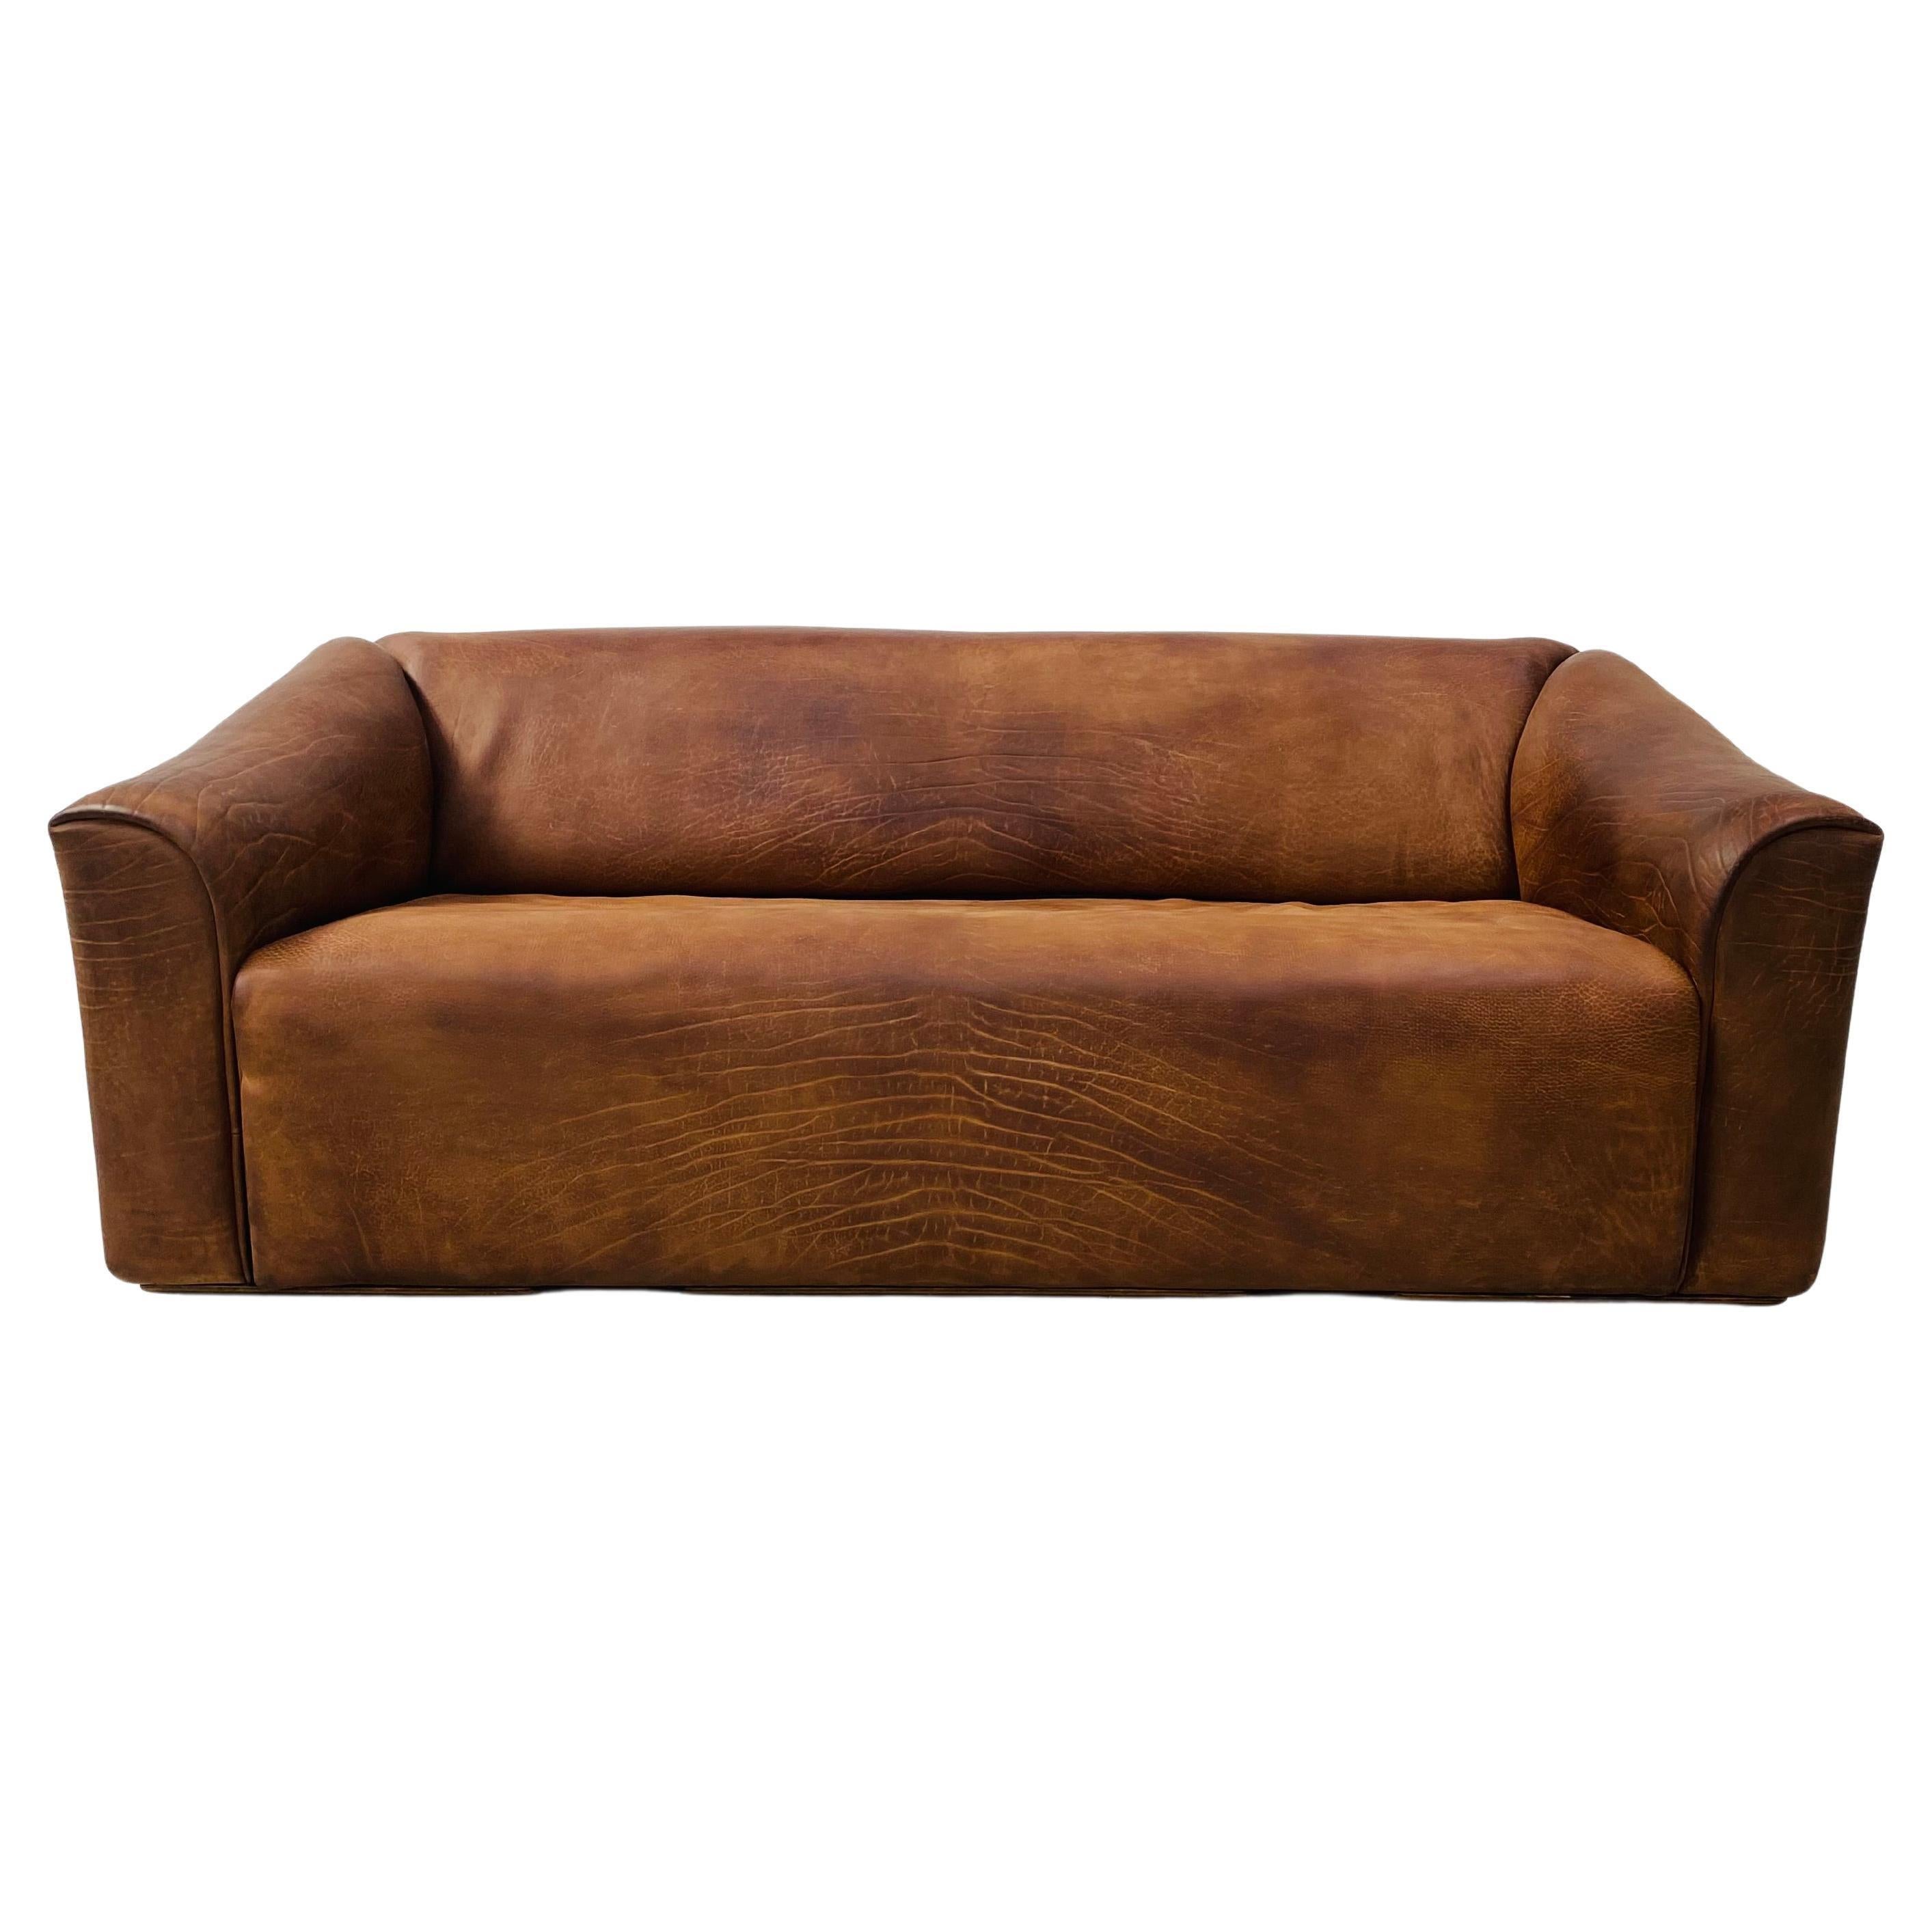 The iconic DS-47 sofa was designed by the De Sede team in the seventies. This mid century sofa is made of 5mm thick NECK leather recognizable in characteristic fat wrinkles with great patina. The different textures of the NECK Leather and the fat